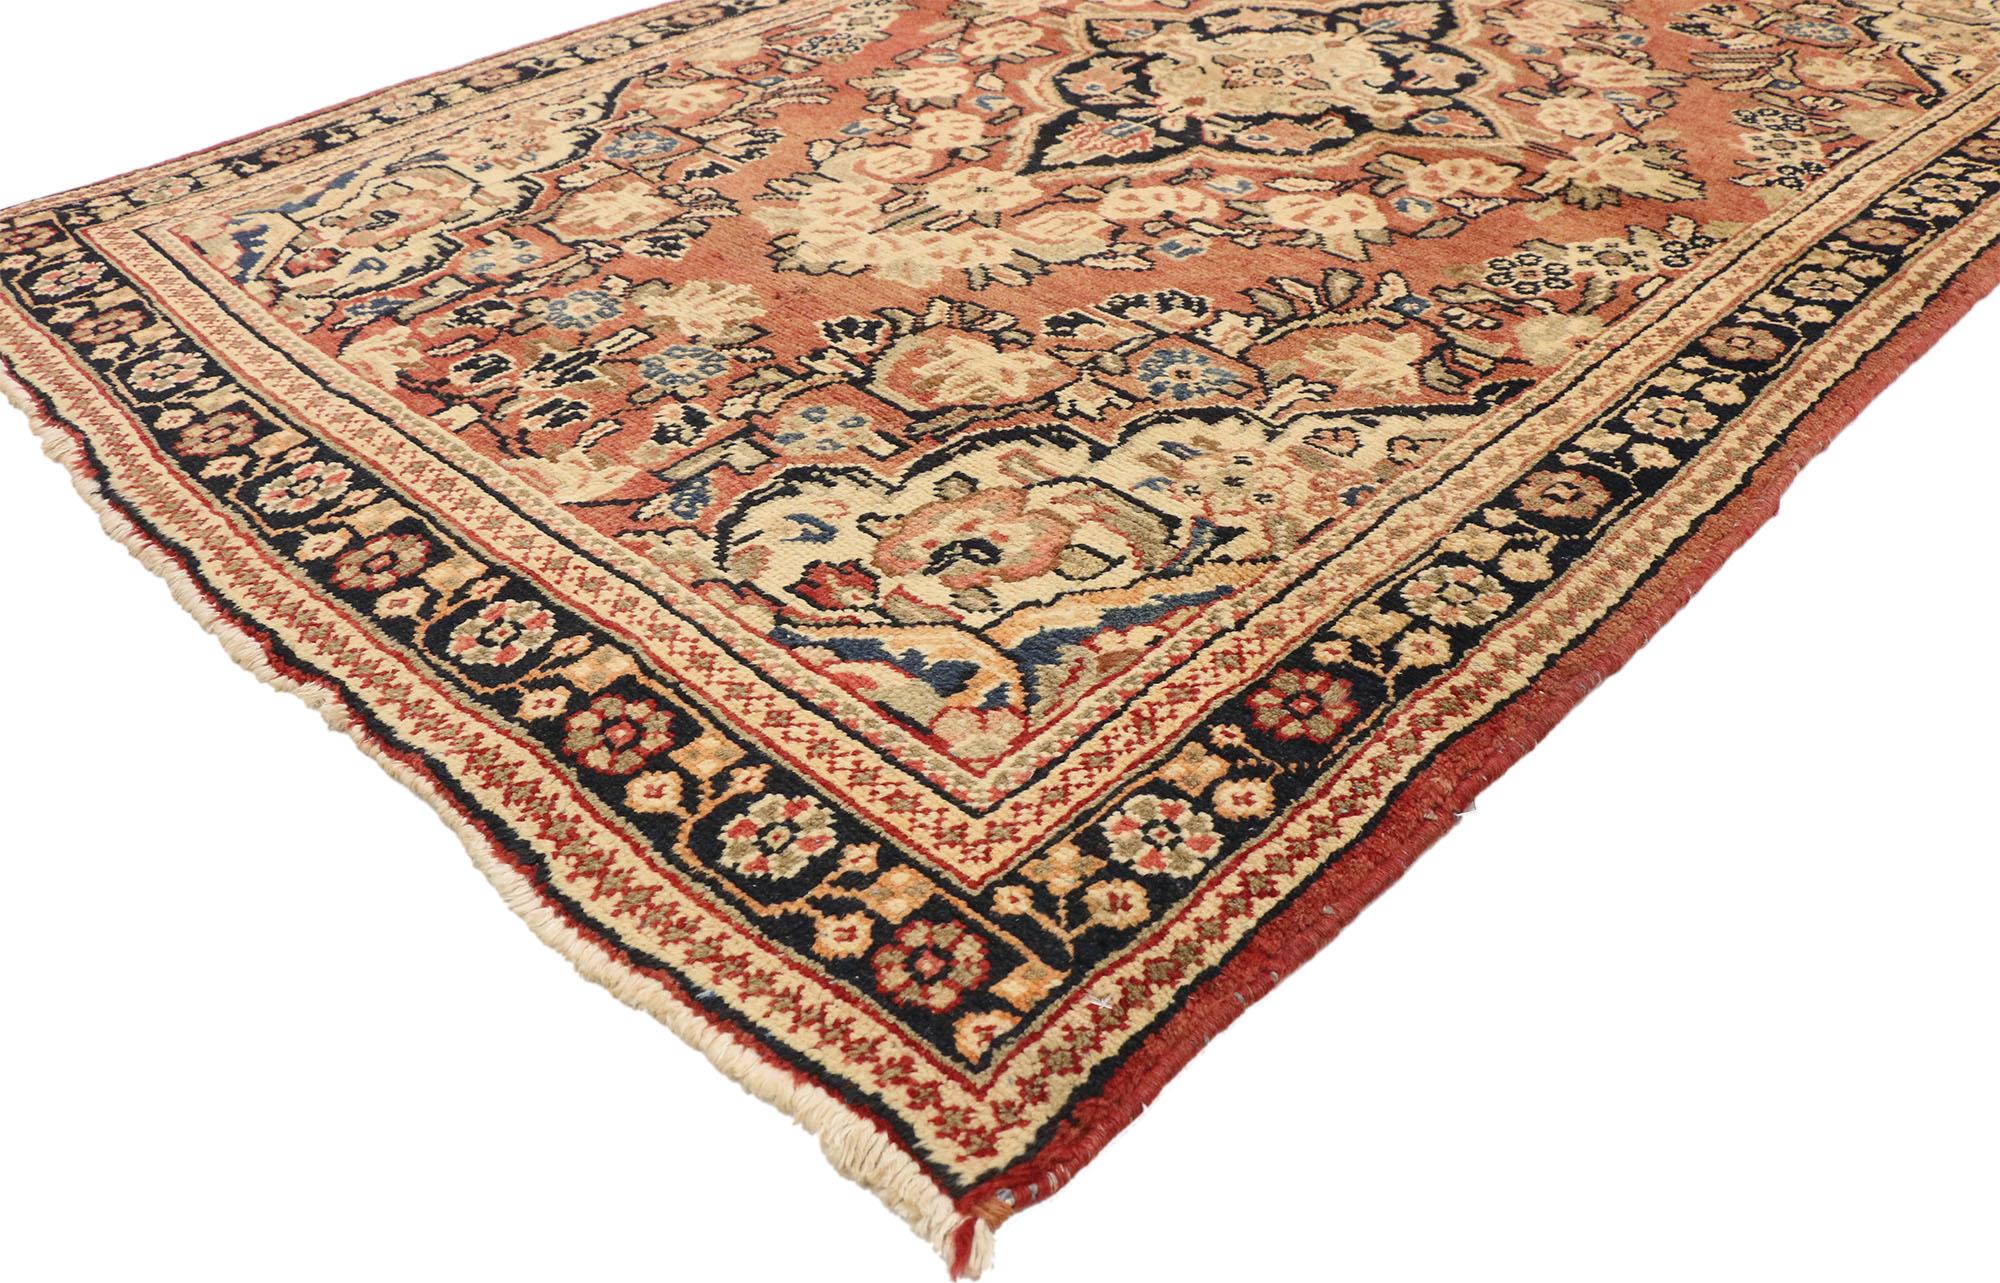 75536 Vintage Persian Mahal Rug with Modern Rustic English Country Cottage Style 04'02 x 06'07. Boasting a floral bounty in a range of warm hues, this hand-knotted wool vintage Persian Mahal rug beautifully embodies an English Country Cottage style